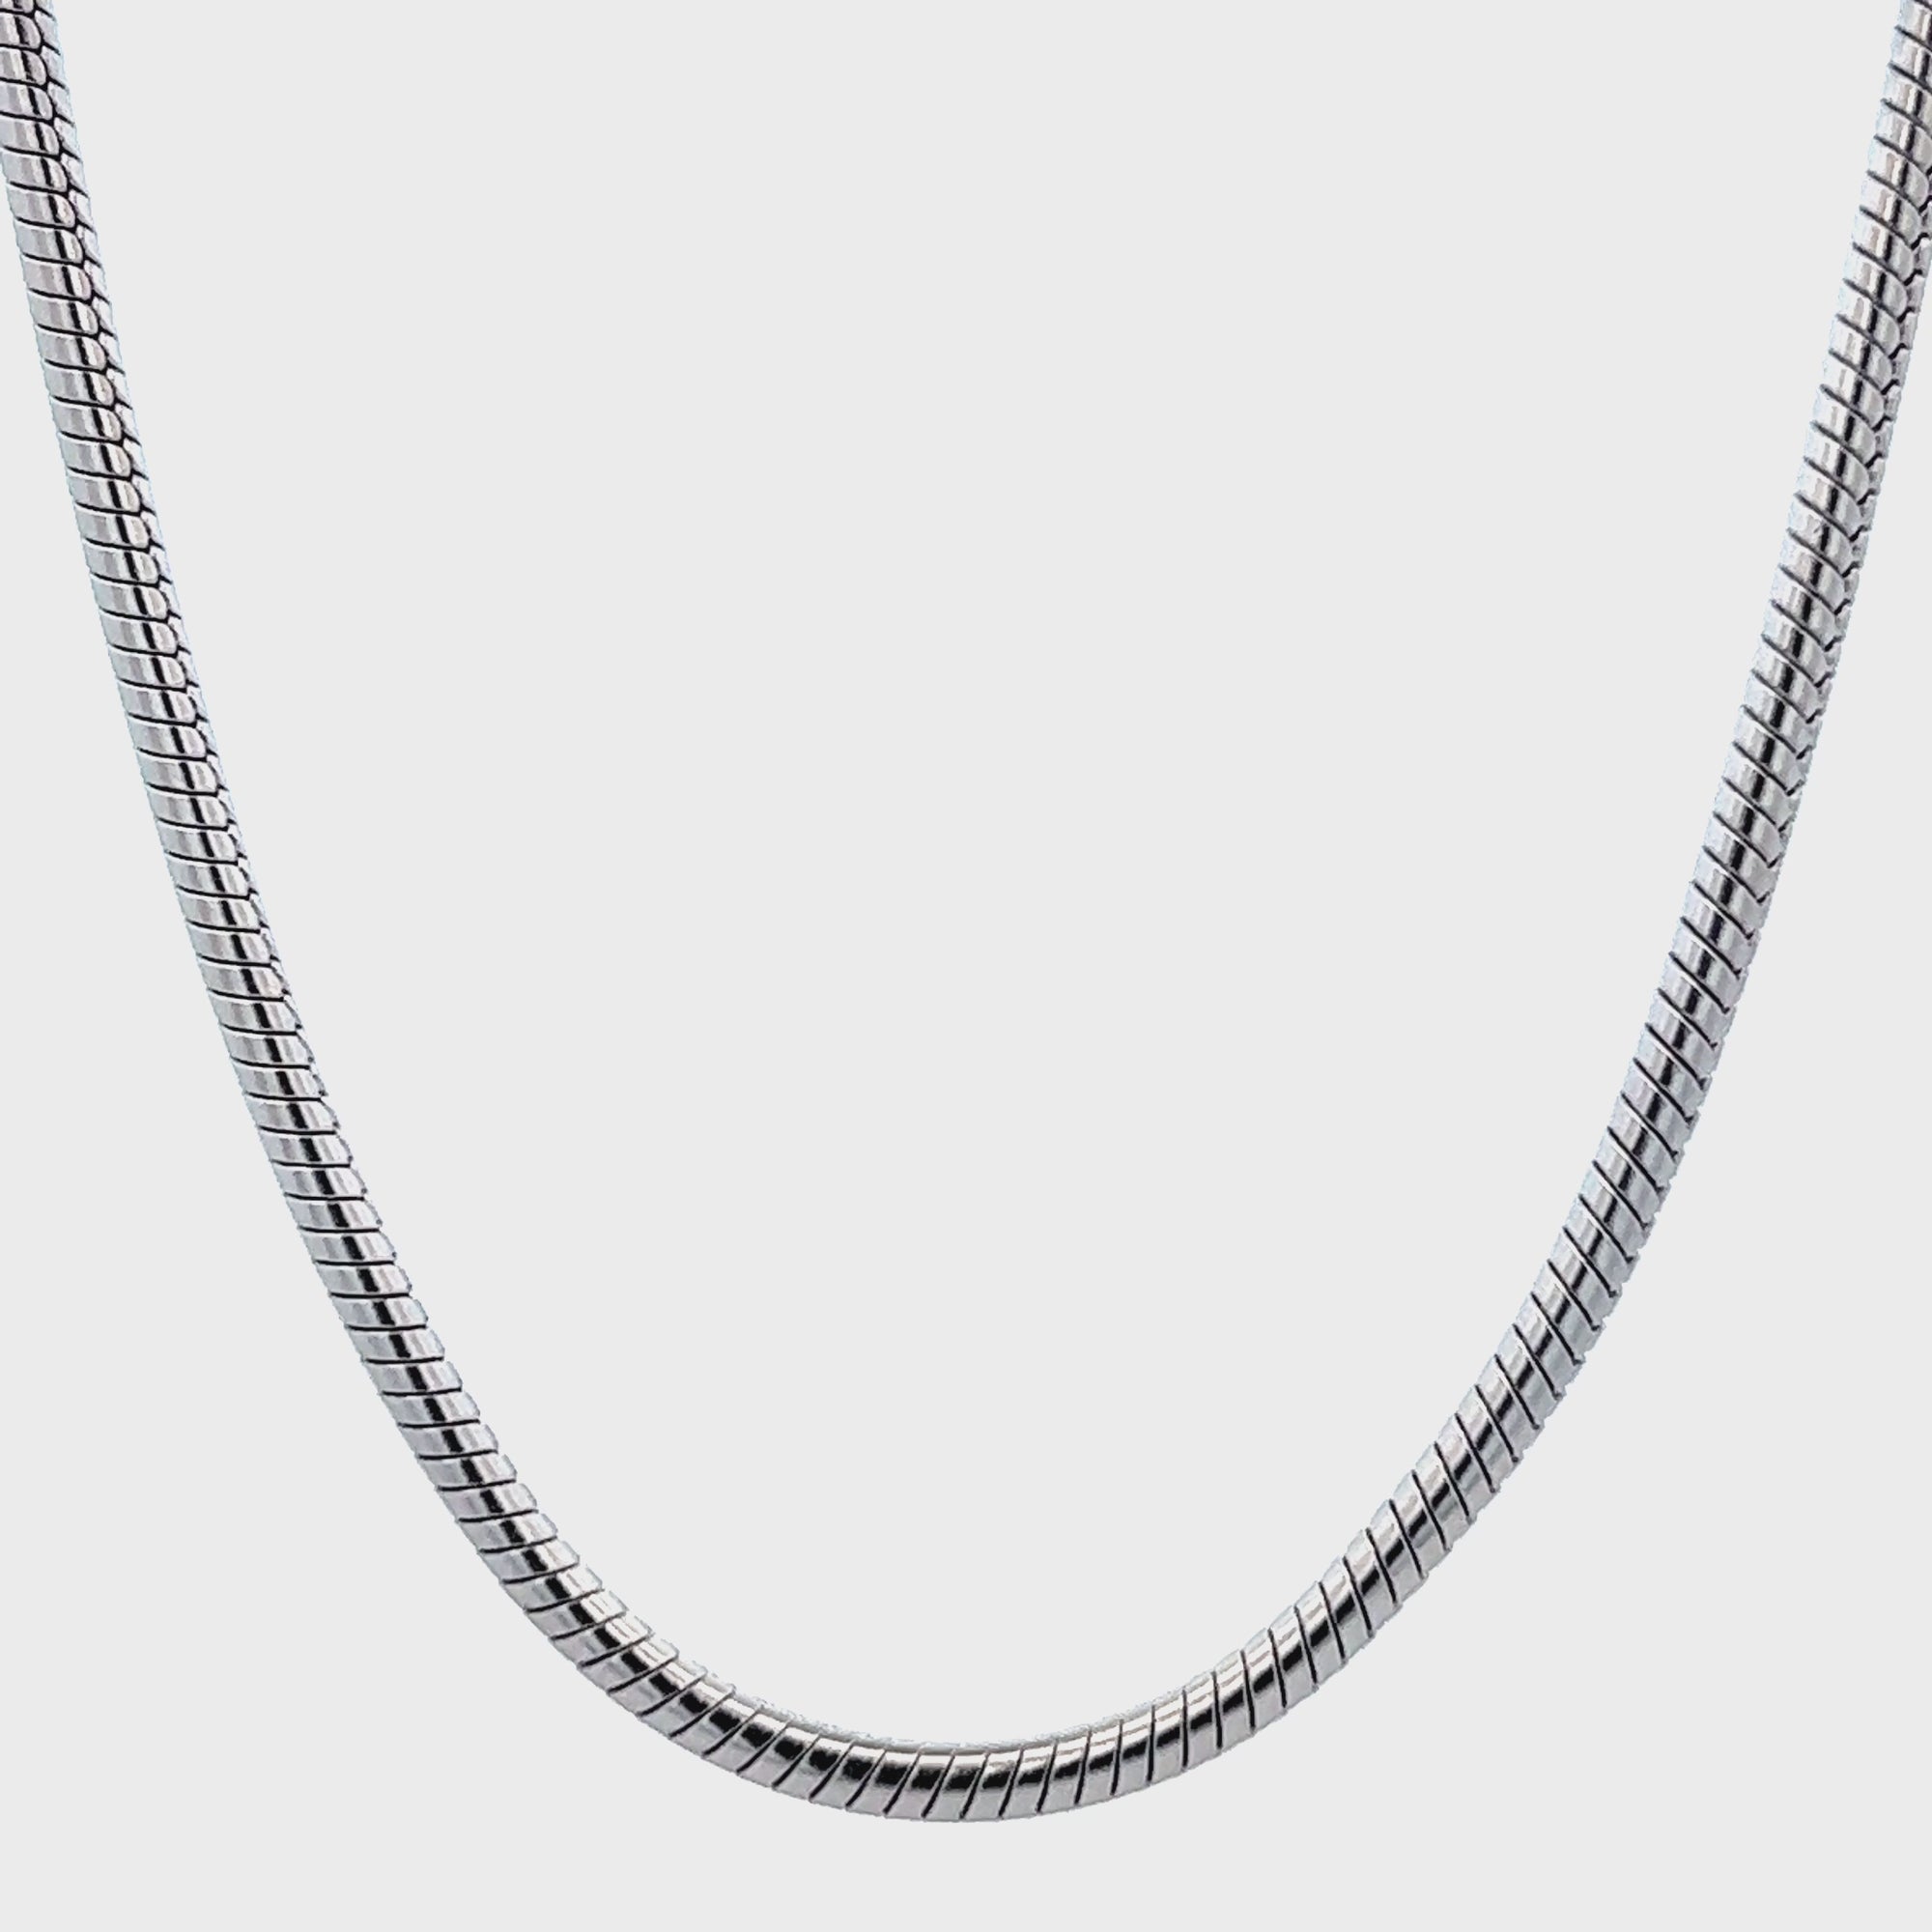 Silver Tone Stainless Steel 3mm Rattail Chain